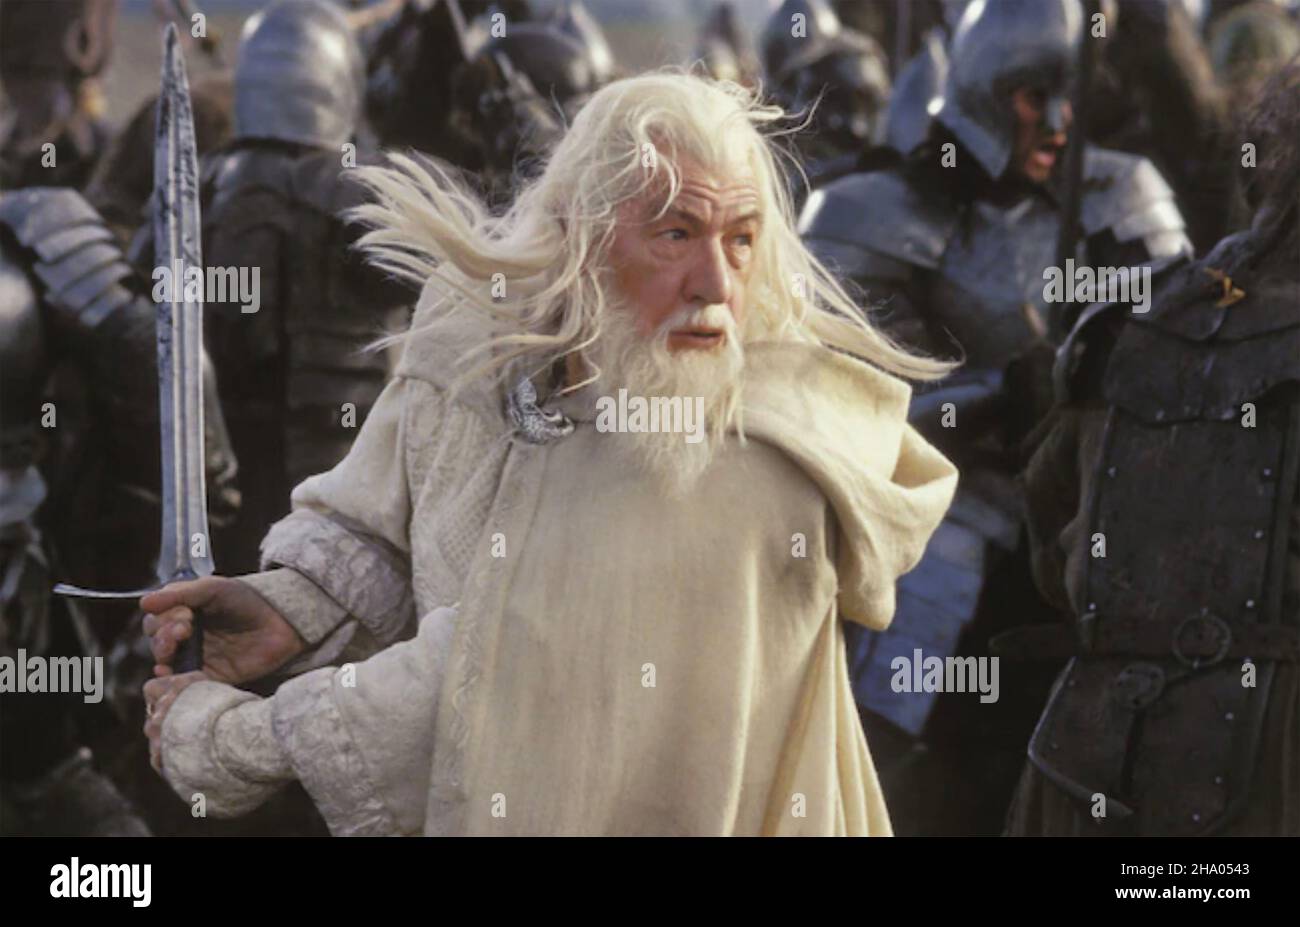 LORD OF THE RINGS: THE RETURN OF THE KING 2003 New Line Cinema film with Ian McKellen as Gandalf Stock Photo